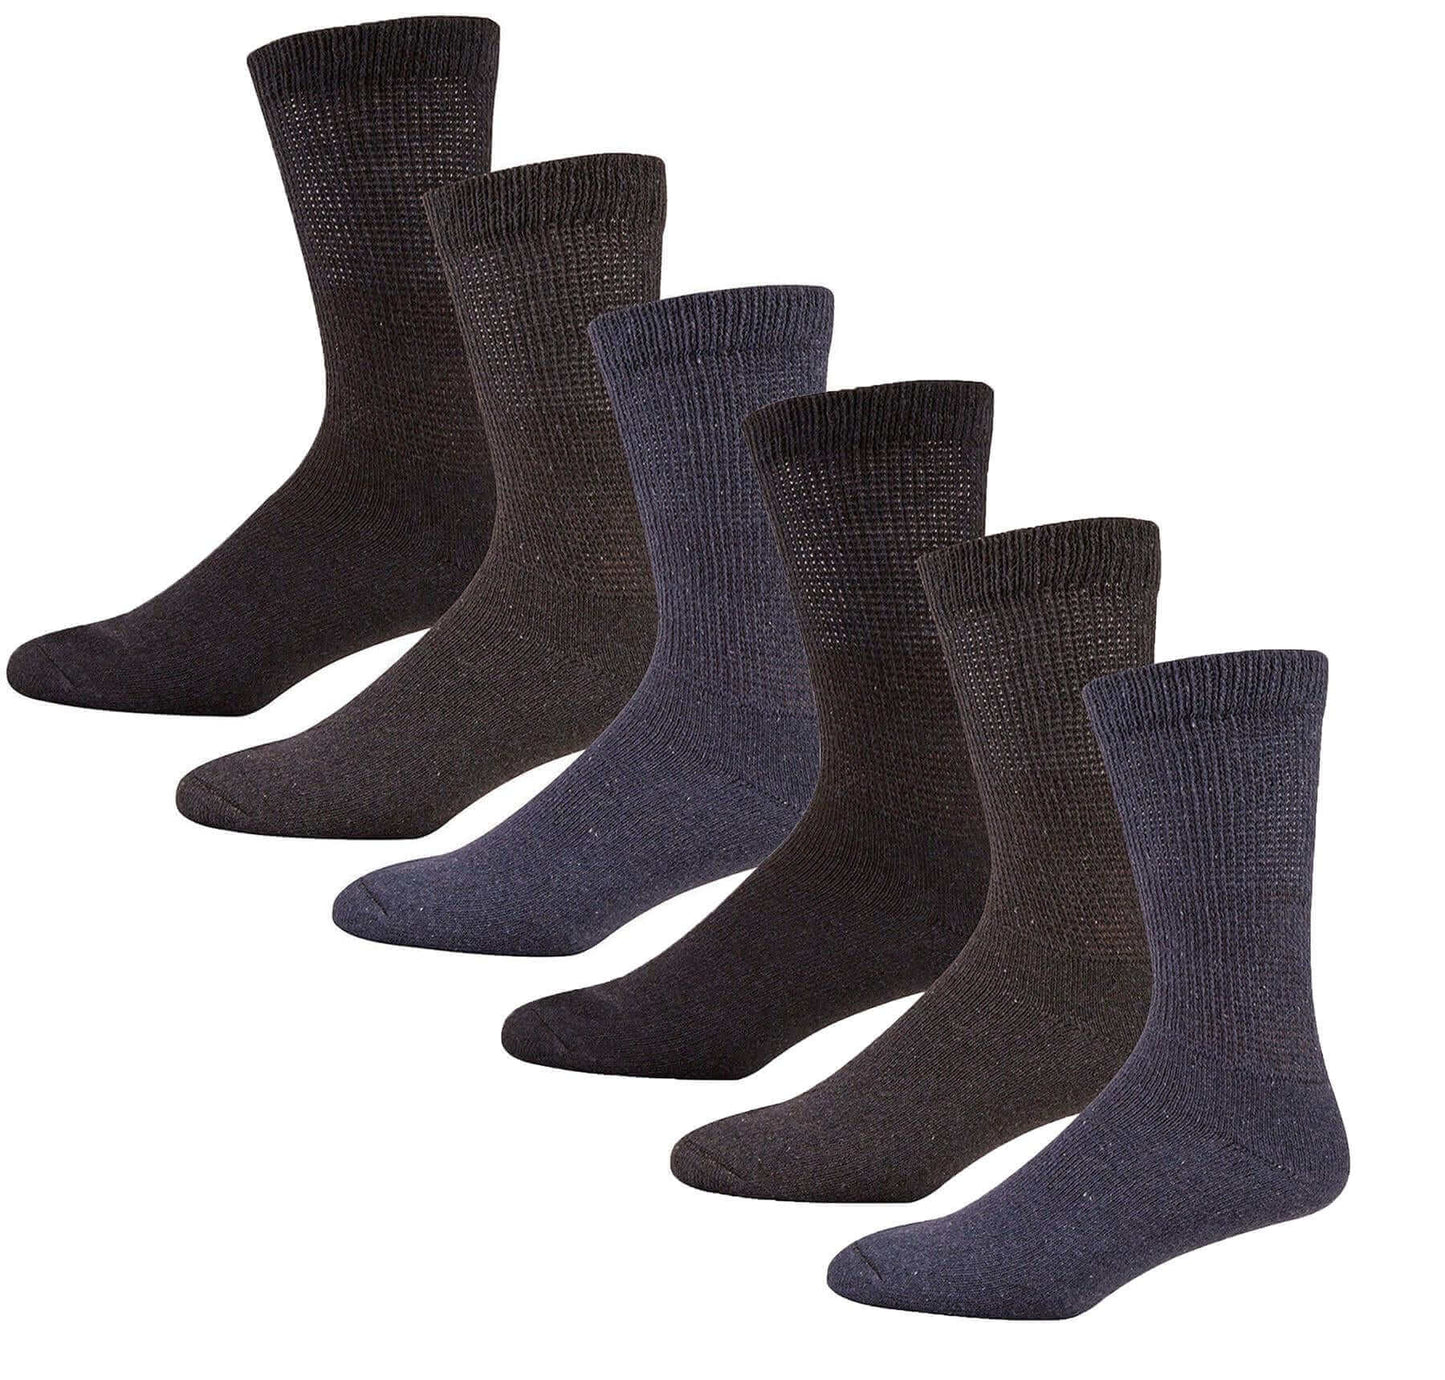 Pack Of 6 Men's Extra Wide Socks Loose Top Diabetic Non Elastic Specialist Sock. Buy now for £8.00. A Socks by Sock Stack. 11-14, 6-11, assorted, athletics, black, boot, bottom, boys, breathable, comfortable, cosy, cotton, diabetic, dress socks, mens, men